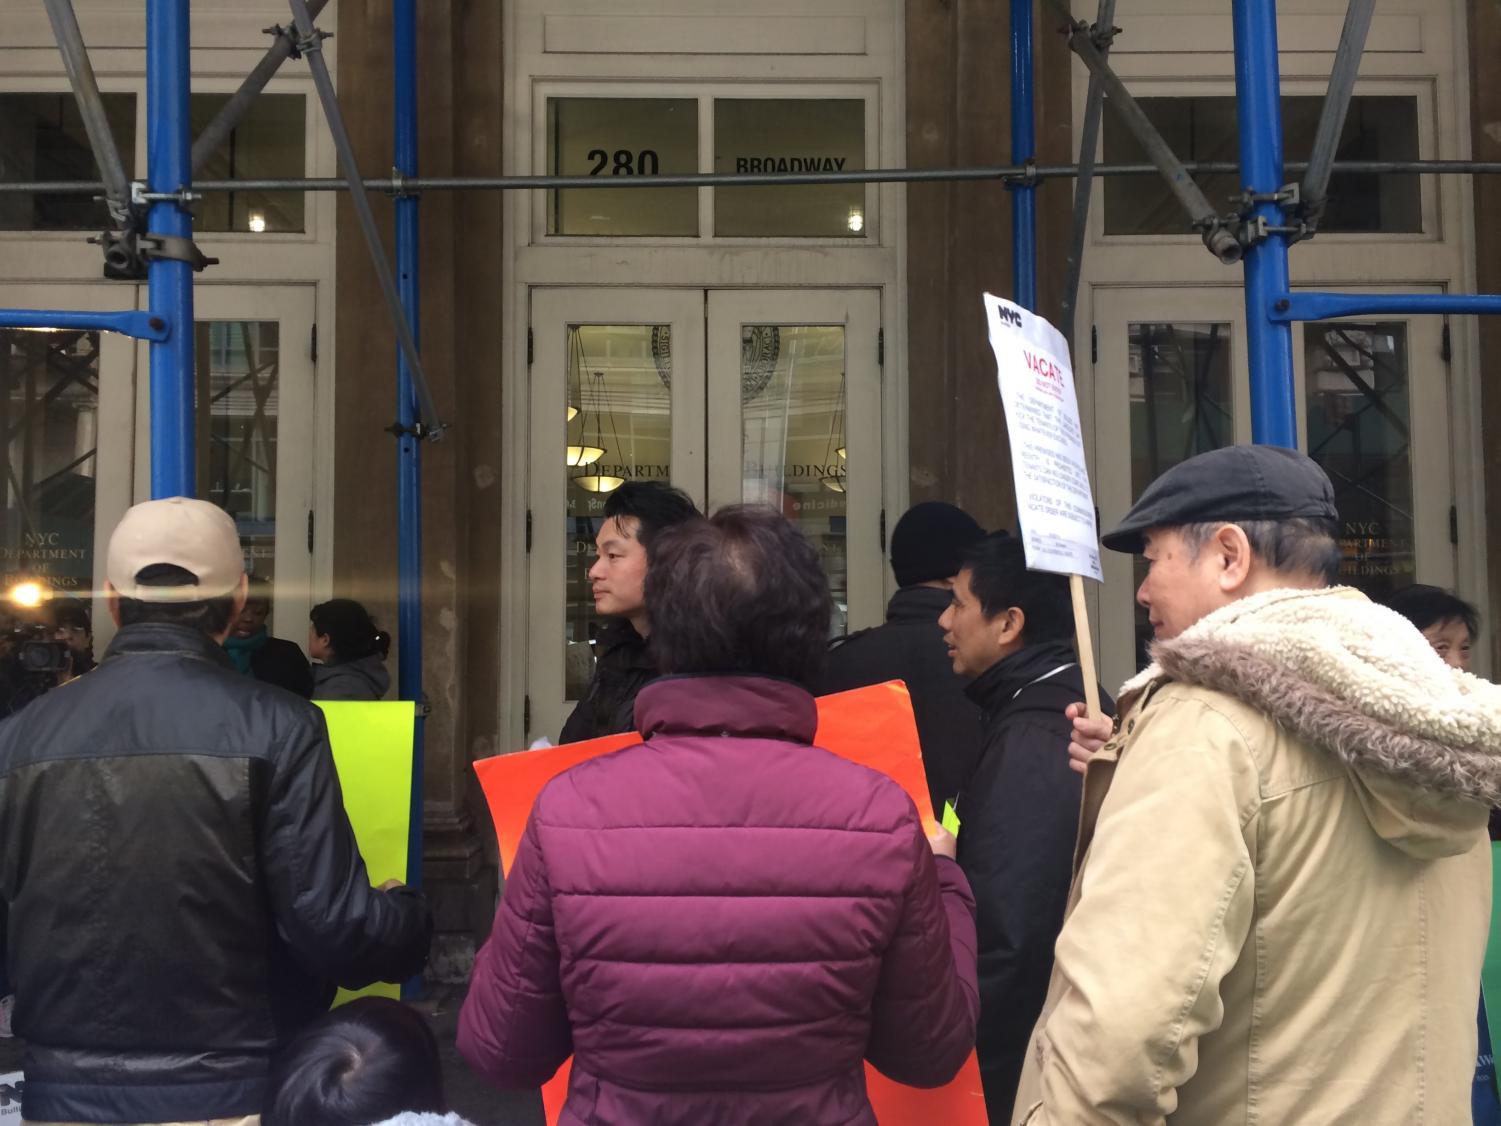 Evicted+85+Bowery+Tenants+Protest+Outside+Department+of+Buildings+Office